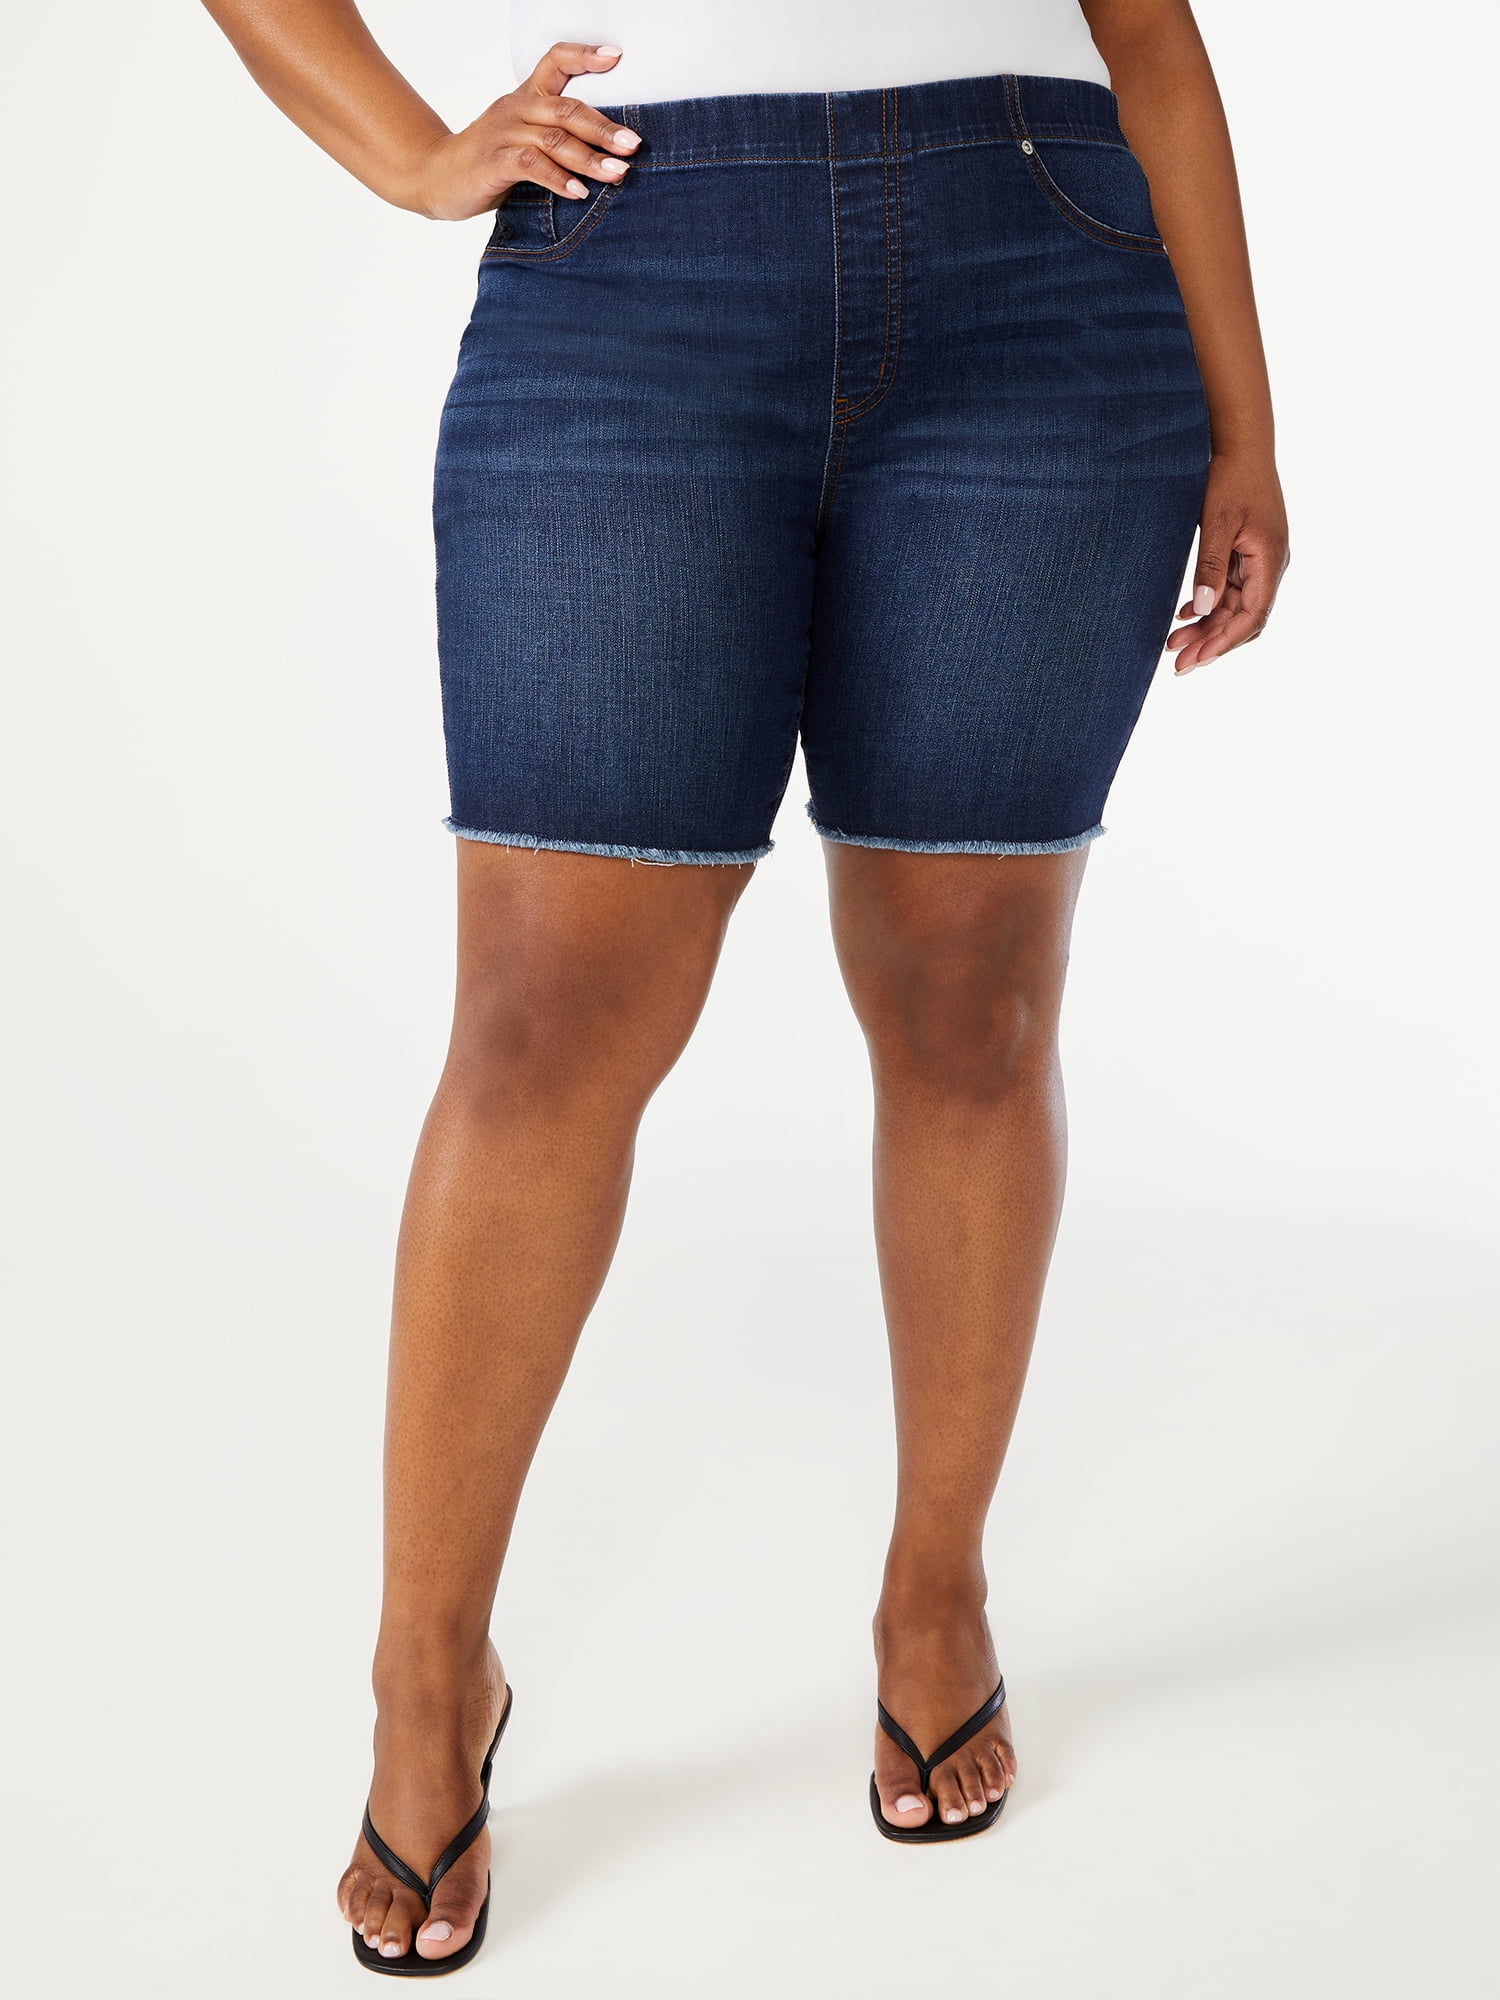 Affordable Plus Size Basics & The Best Places To Shop For Them | Short  outfits, Denim shorts outfit, Plus size shorts outfit